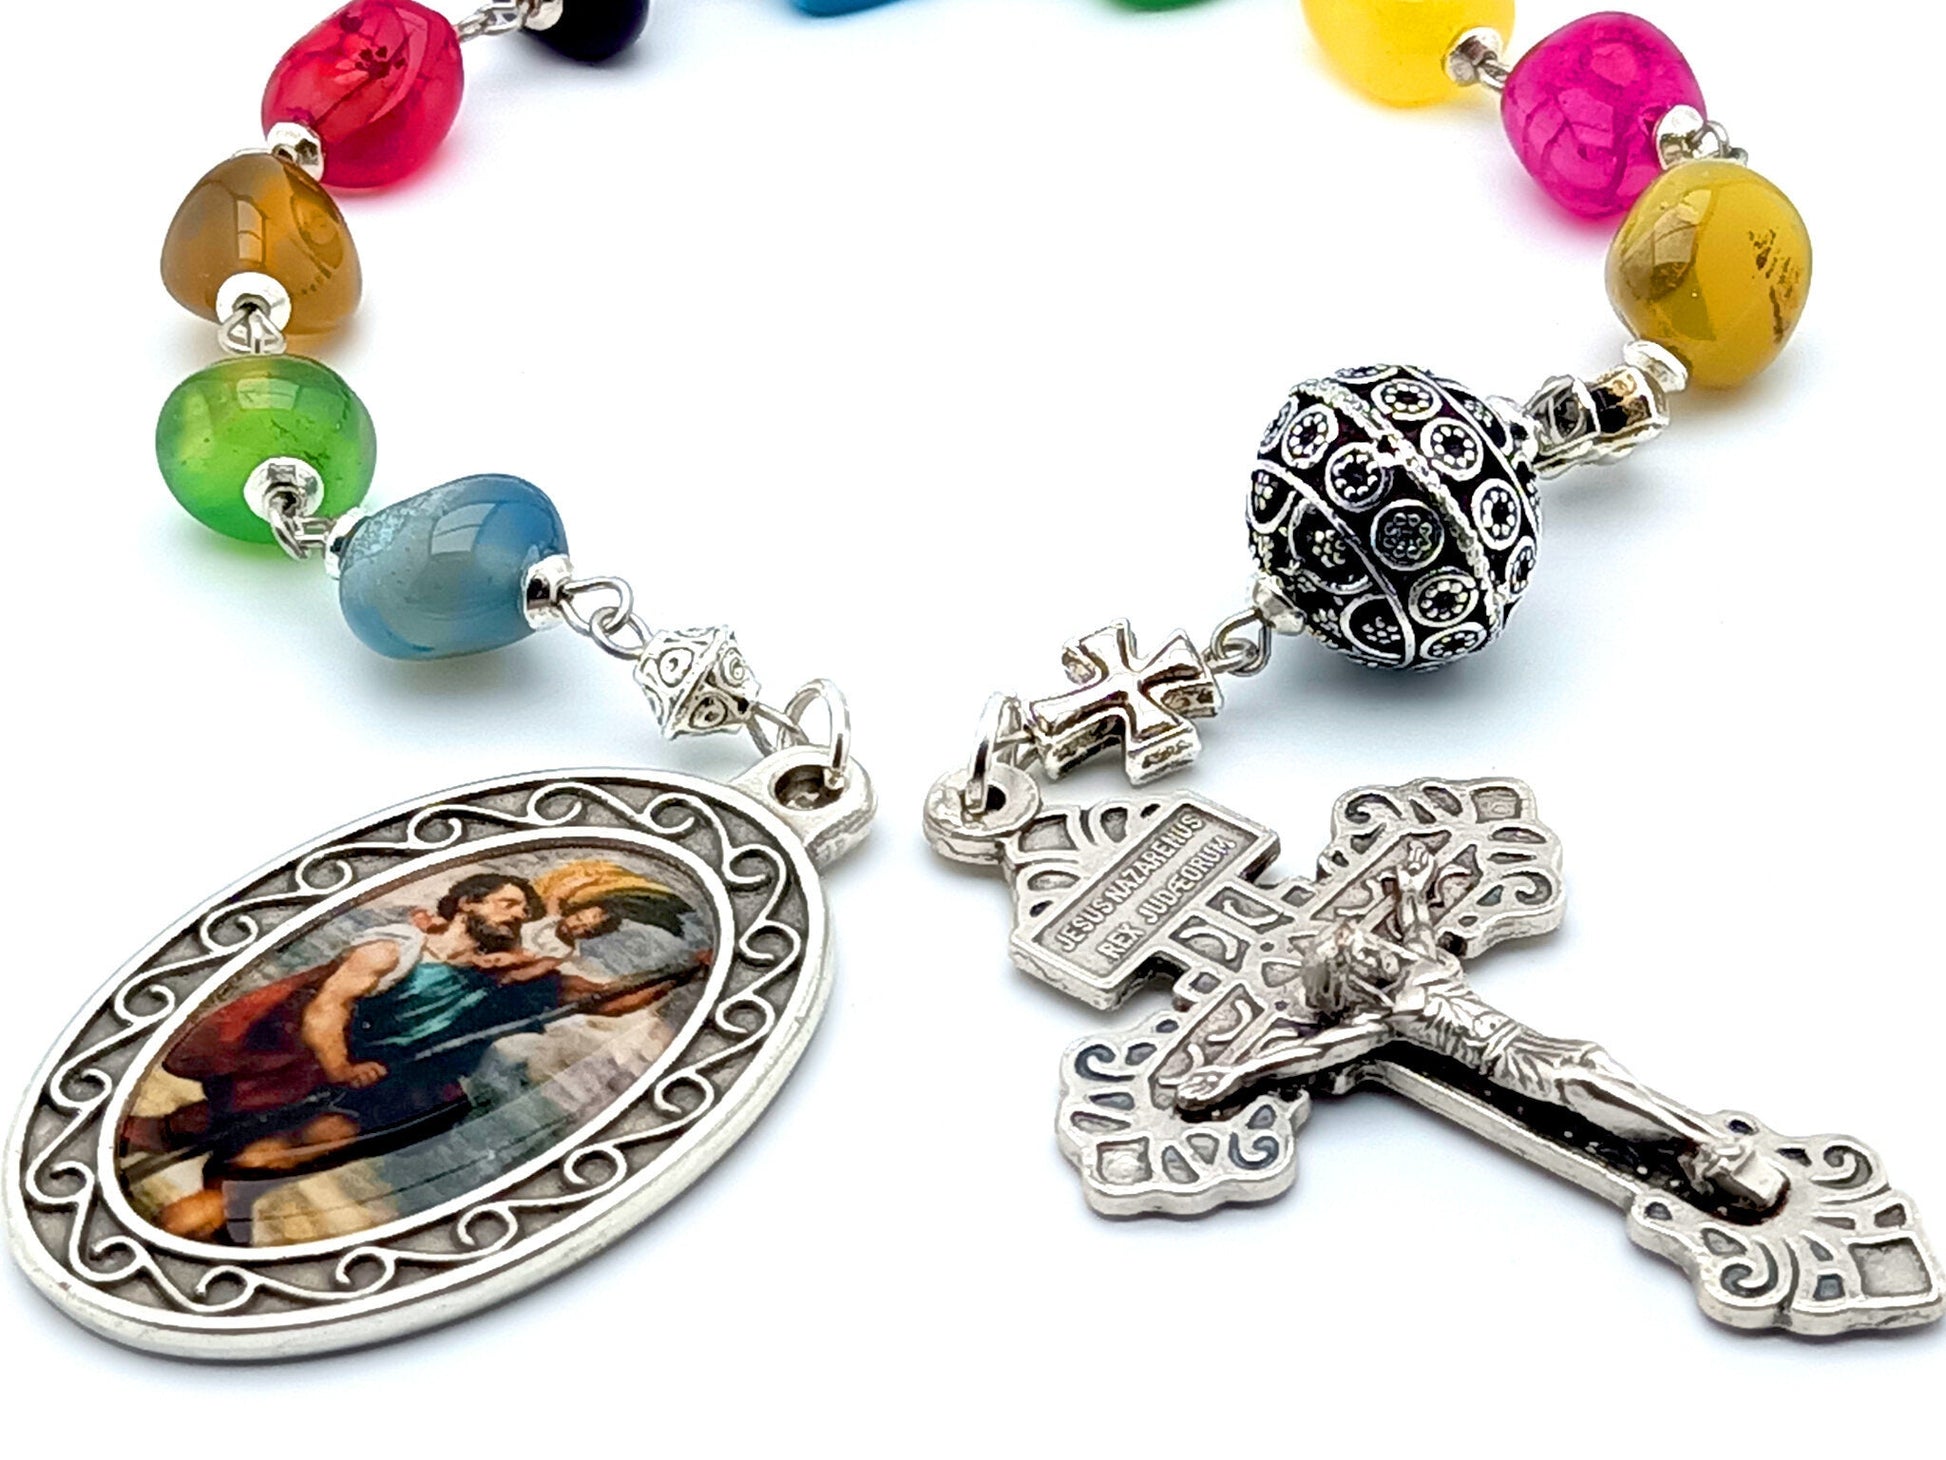 Saint Christopher unique rosary beads single decade tenner rosary with multi coloured gemstone beads, silver pater bead, pardon crucifix and picture centre medal.